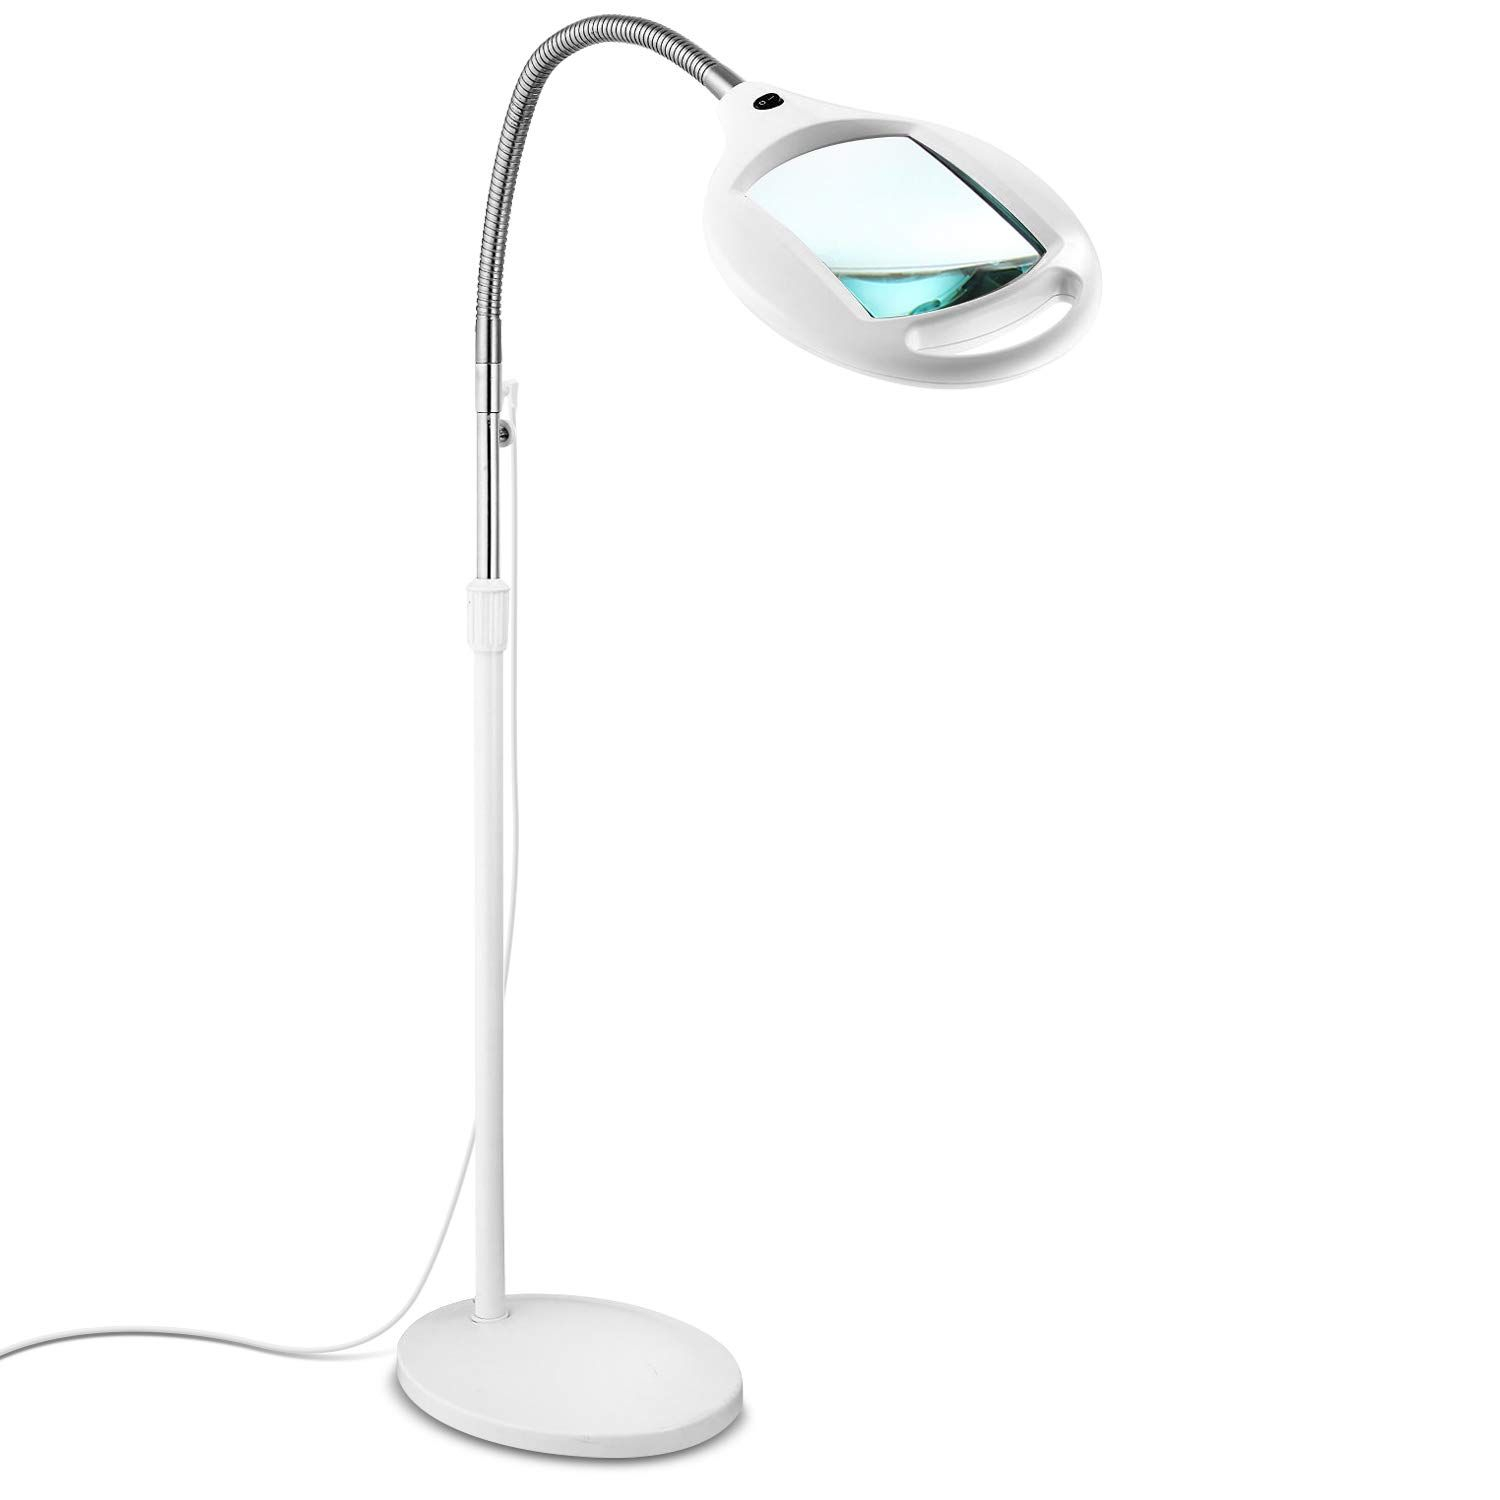 Brightech Lightview Pro Led Magnifying Floor Lamp Daylight throughout size 1500 X 1500